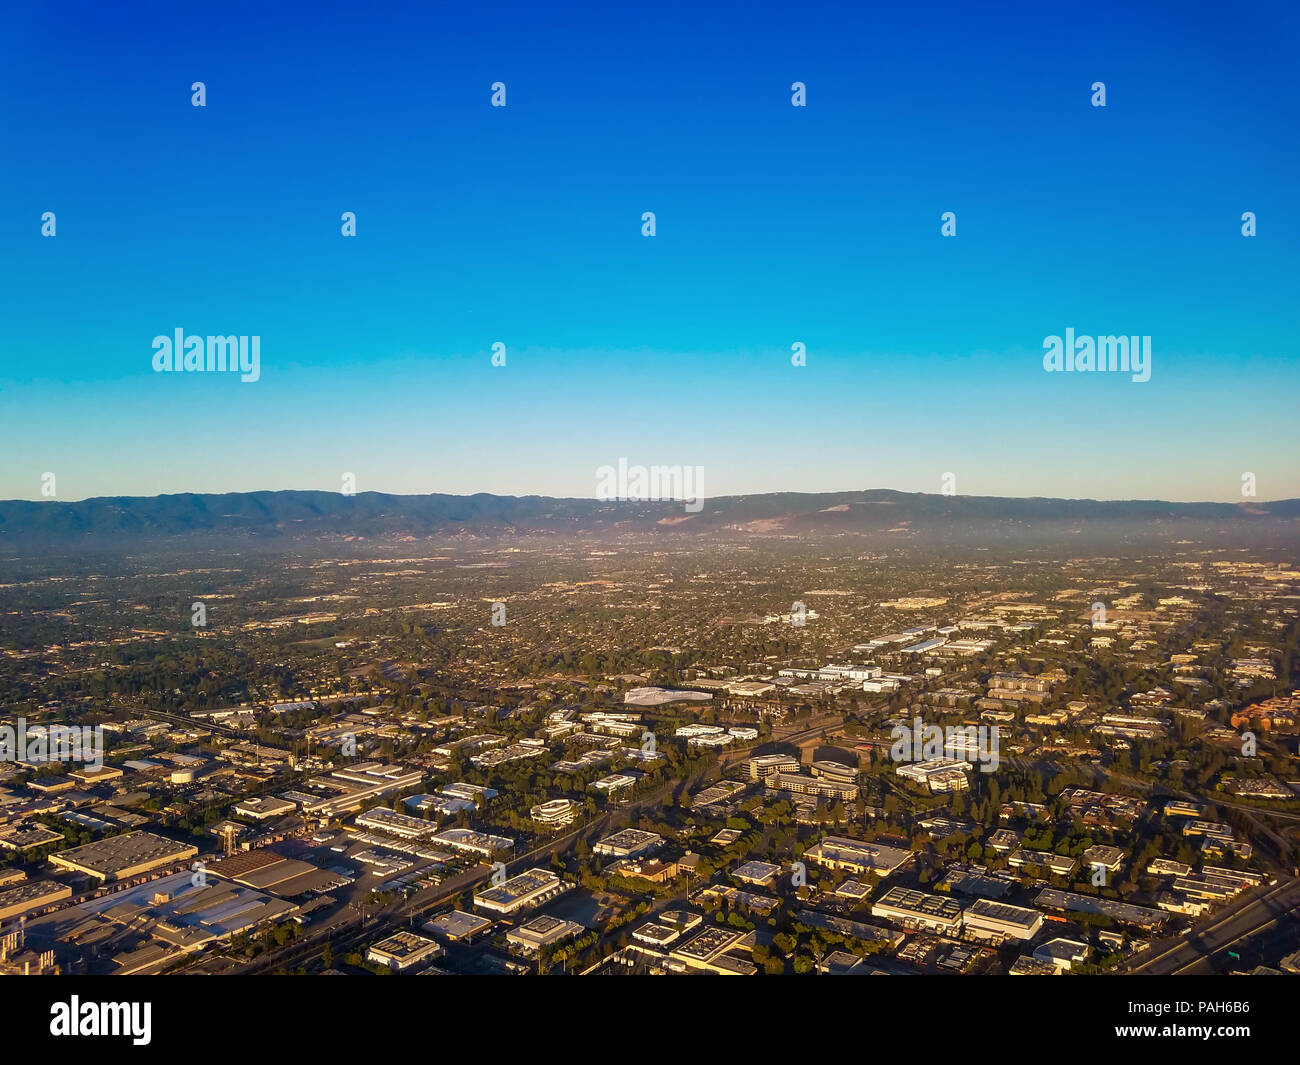 Aerial view on Silicon Valley, California, one of the well known high tech centers. Stock Photo